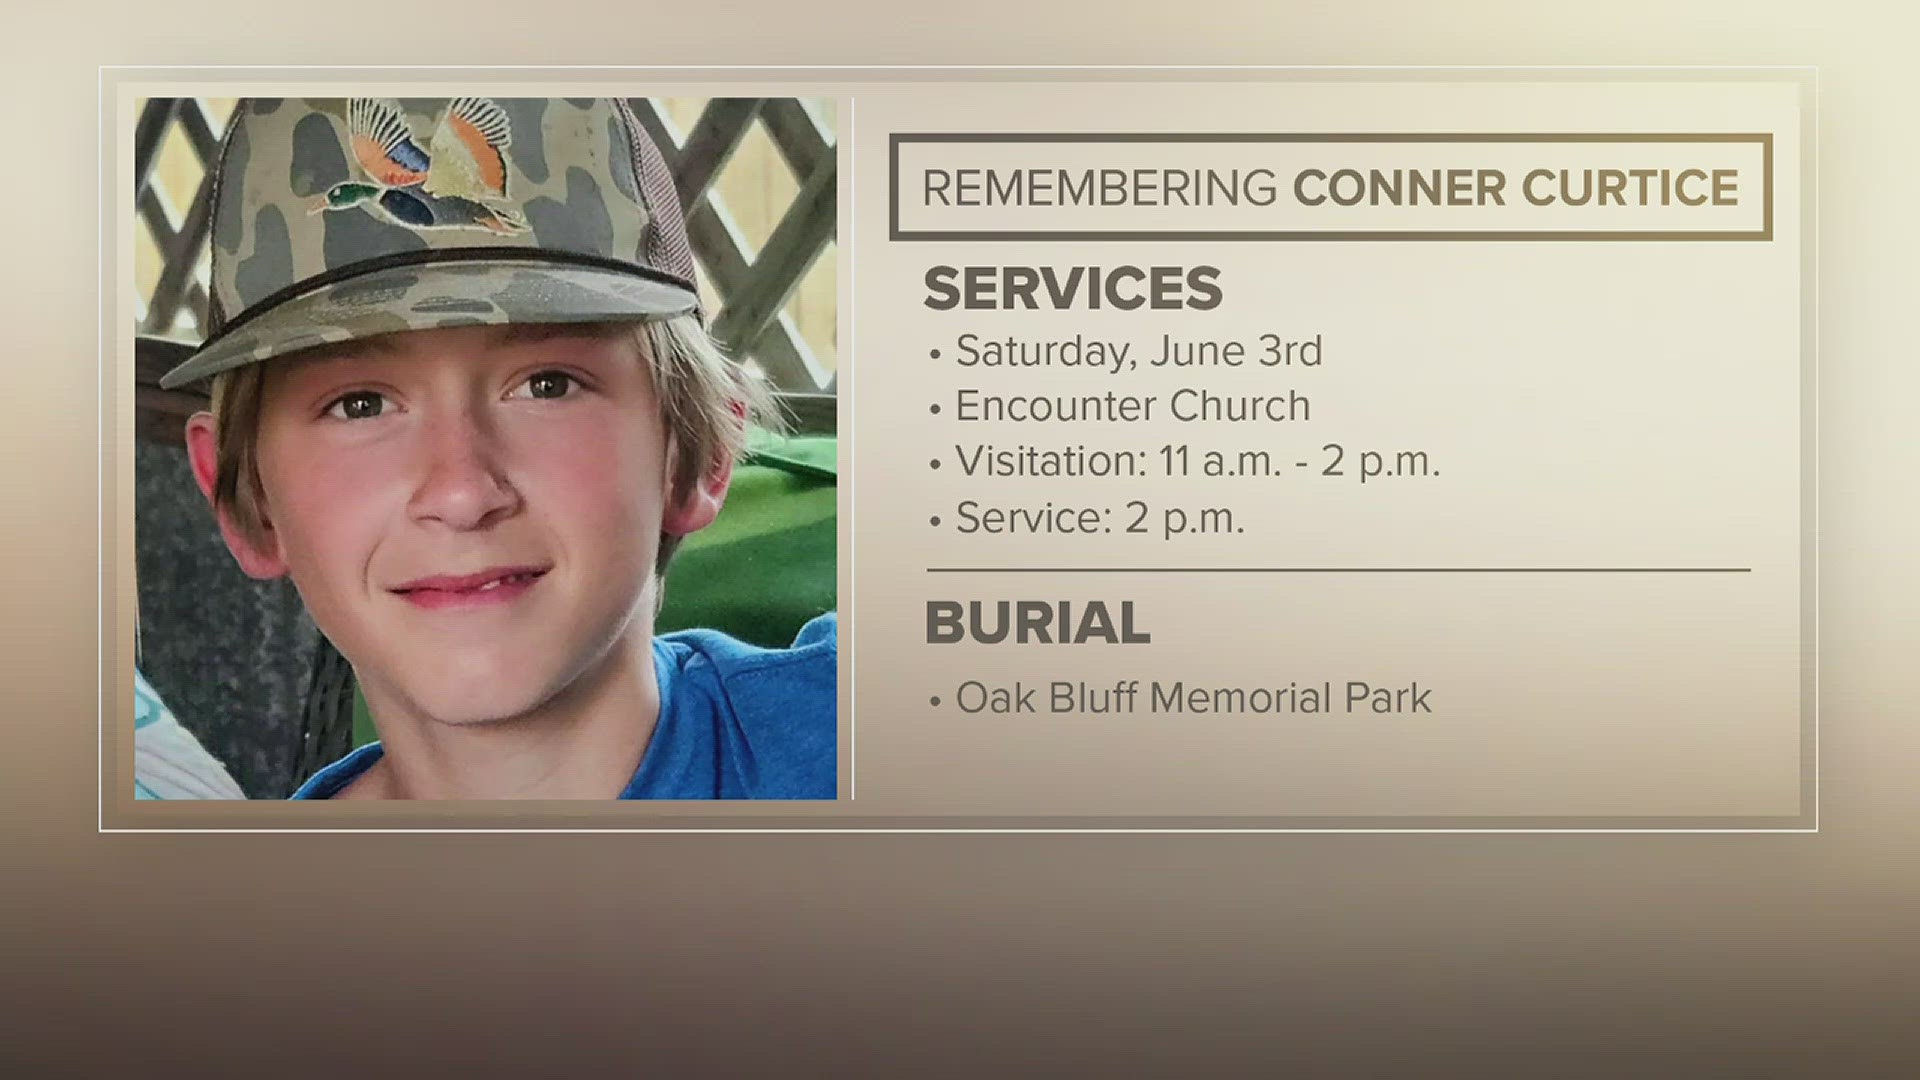 Funeral arrangements have been set for 14-year-old Conner Curtice after his body was recovered from the Neches River following a boating accident.